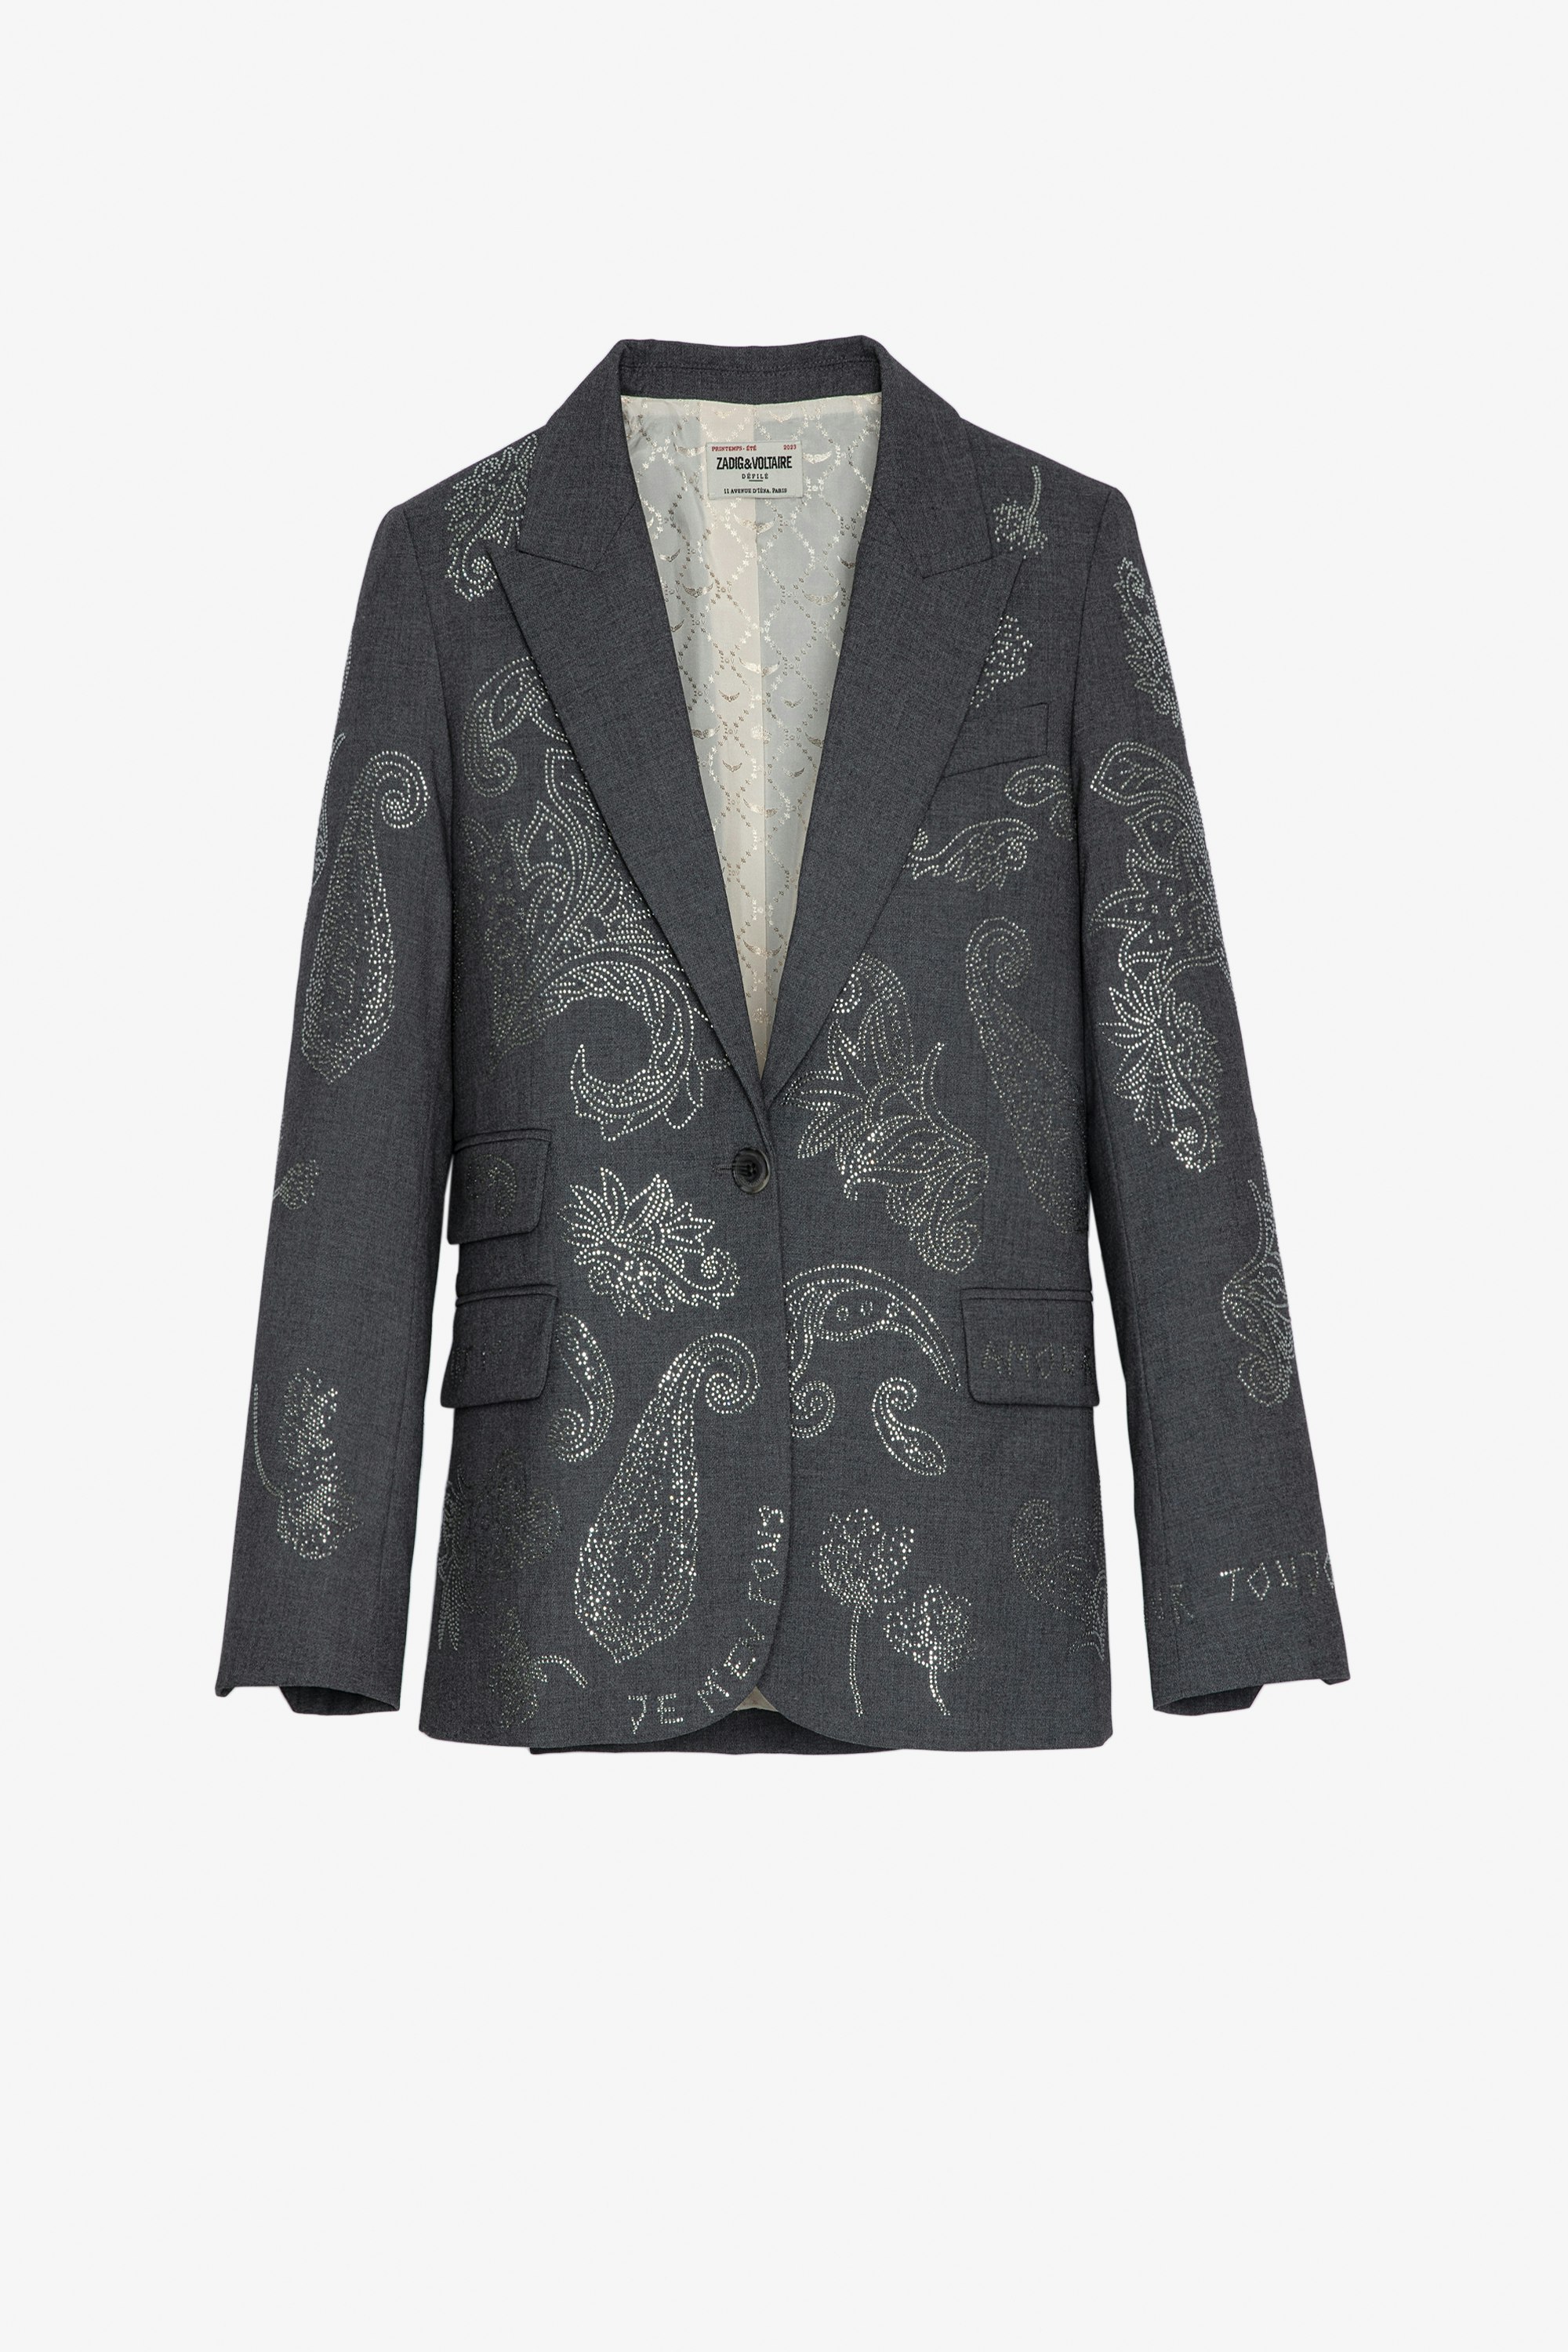 Venus ジャケット Women’s grey tailored jacket with paisley pattern decorated with crystals